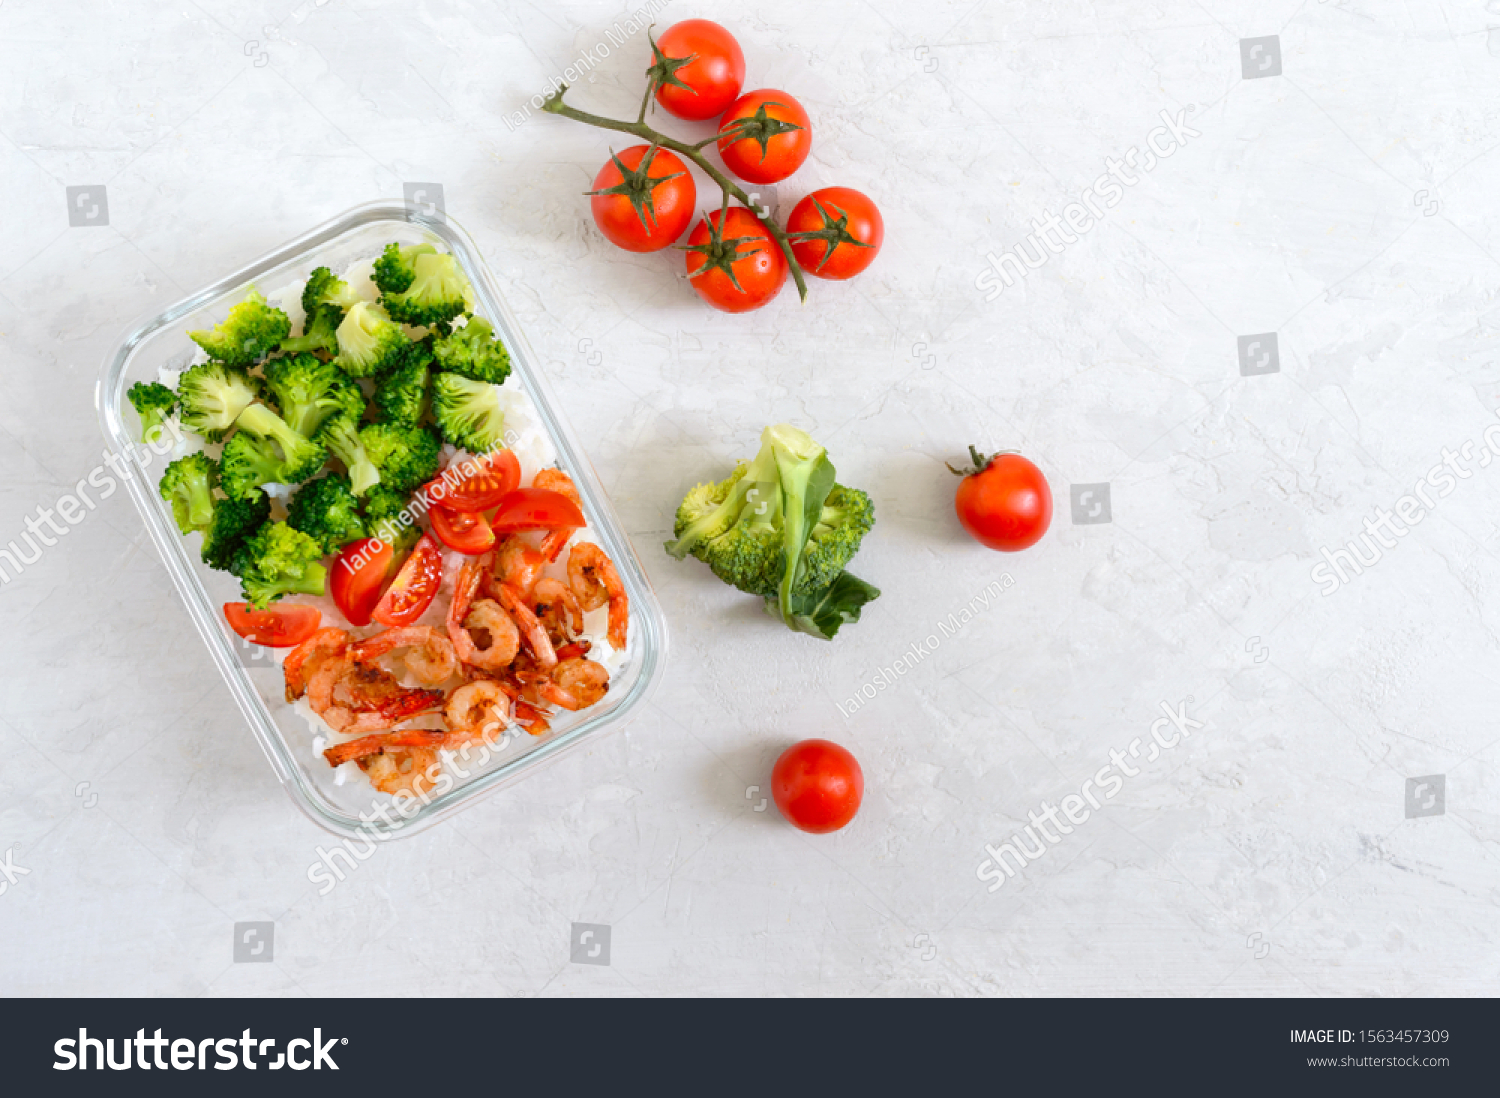 Glass lunch box with a useful lunch on a light background. Rice, broccoli, shrimp, fresh cherry tomatoes - healthy and tasty food. Proper nutrition. Sports diet. Top view #1563457309